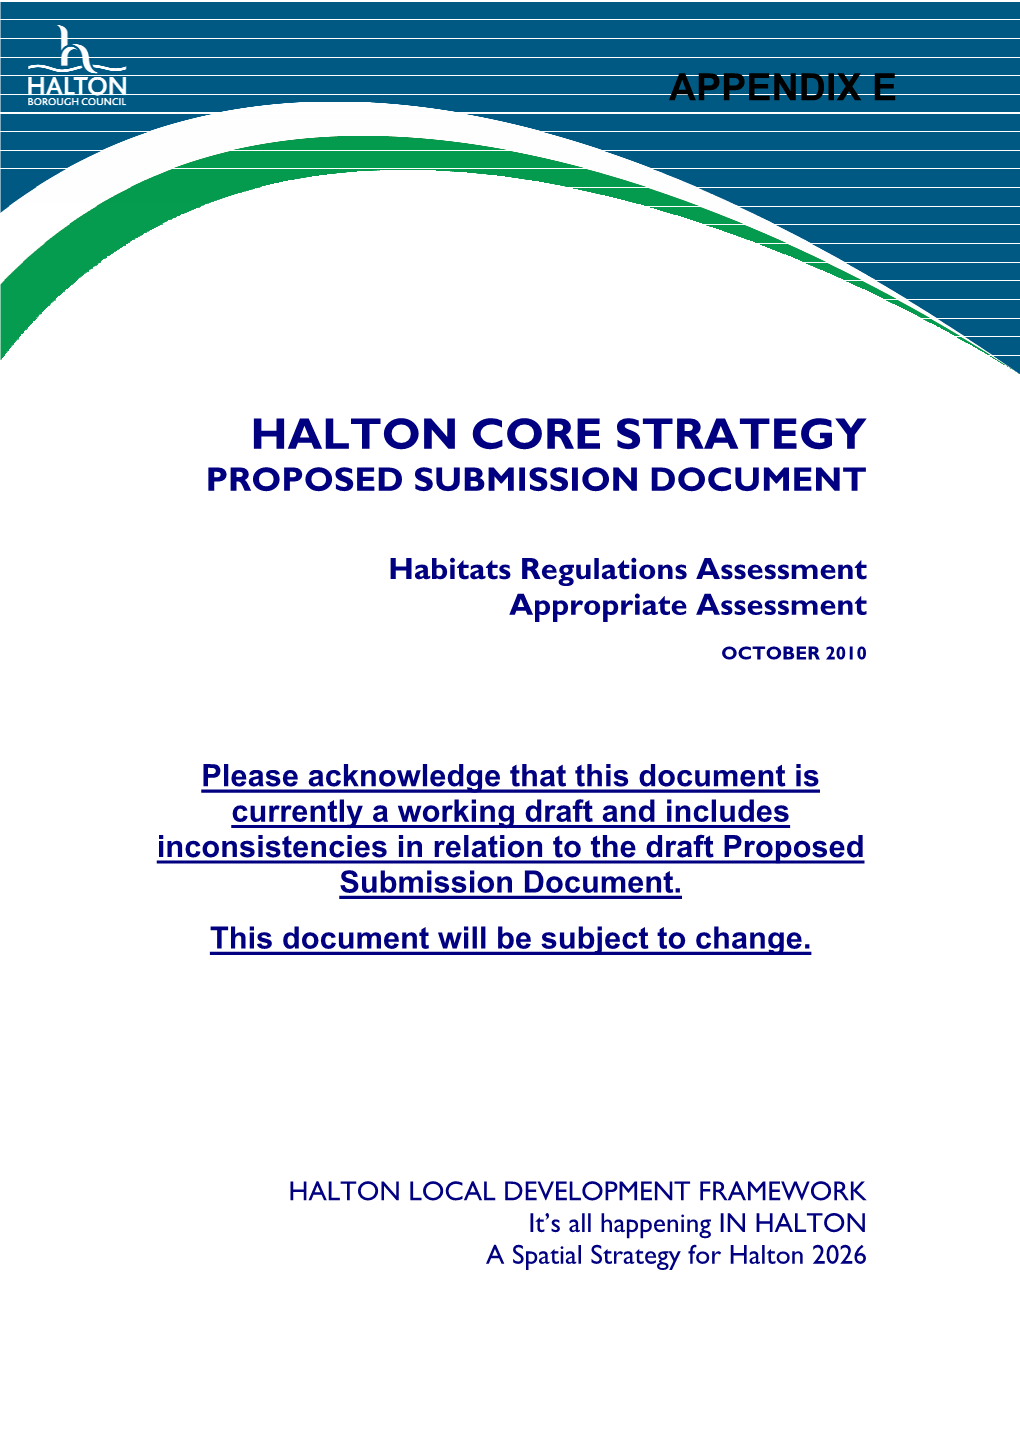 Halton Core Strategy Proposed Submission Document